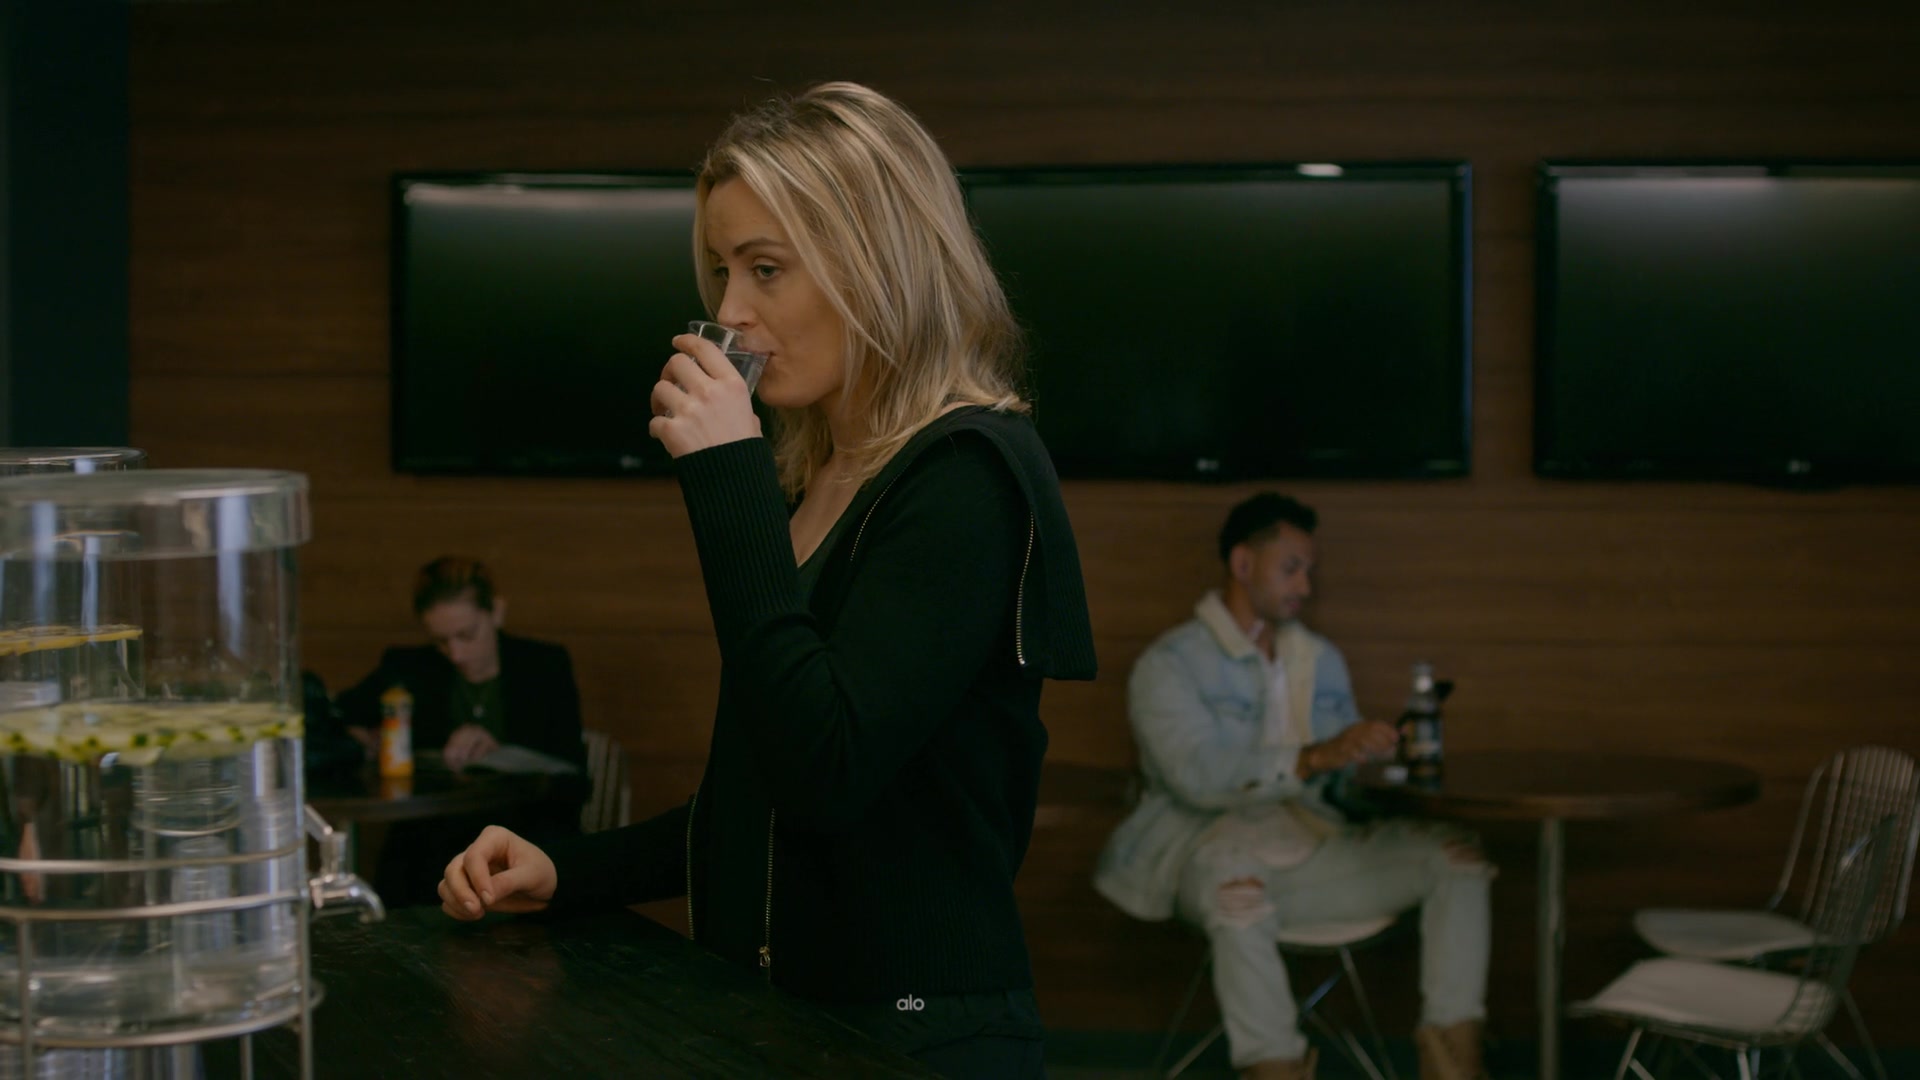 Alo Yoga Jacket Worn by Taylor Schilling as Piper Chapman in Orange Is the New Black ...1920 x 1080